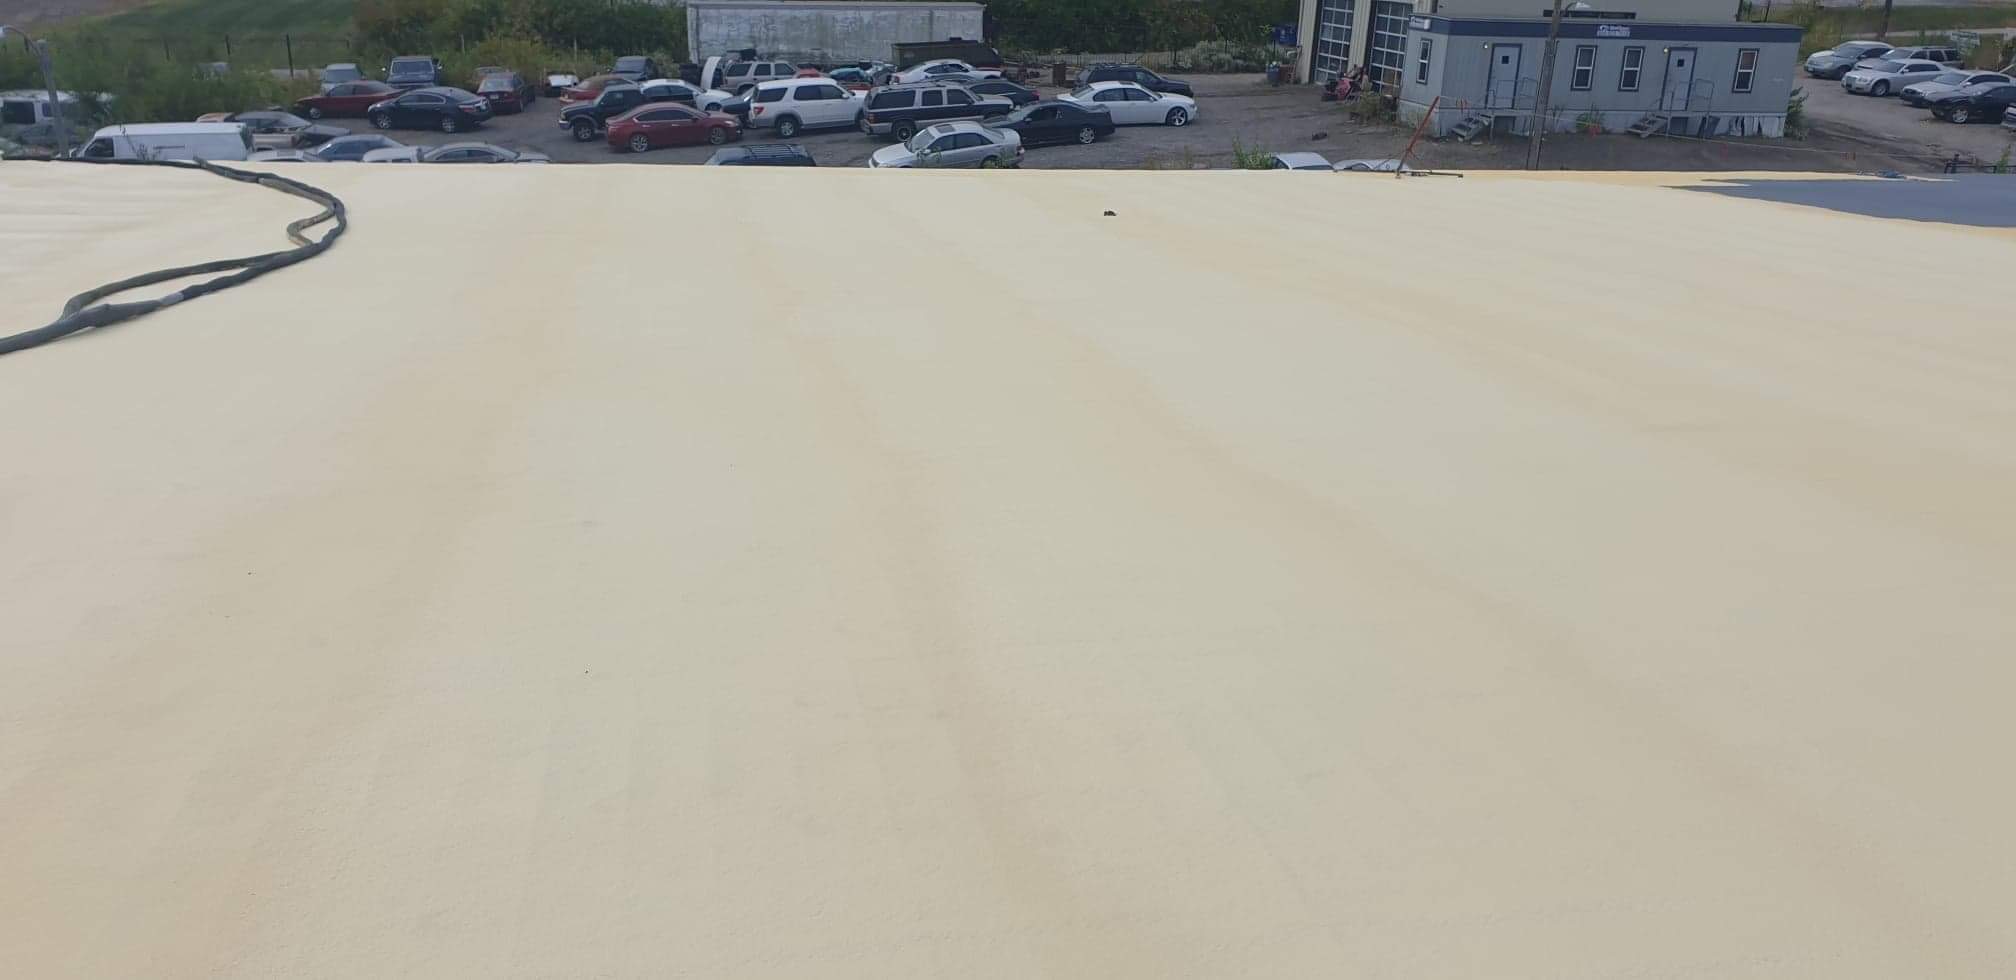 This is what a roof coating looks like after it has been applied by Conklin roofs in Knoxville Tennessee